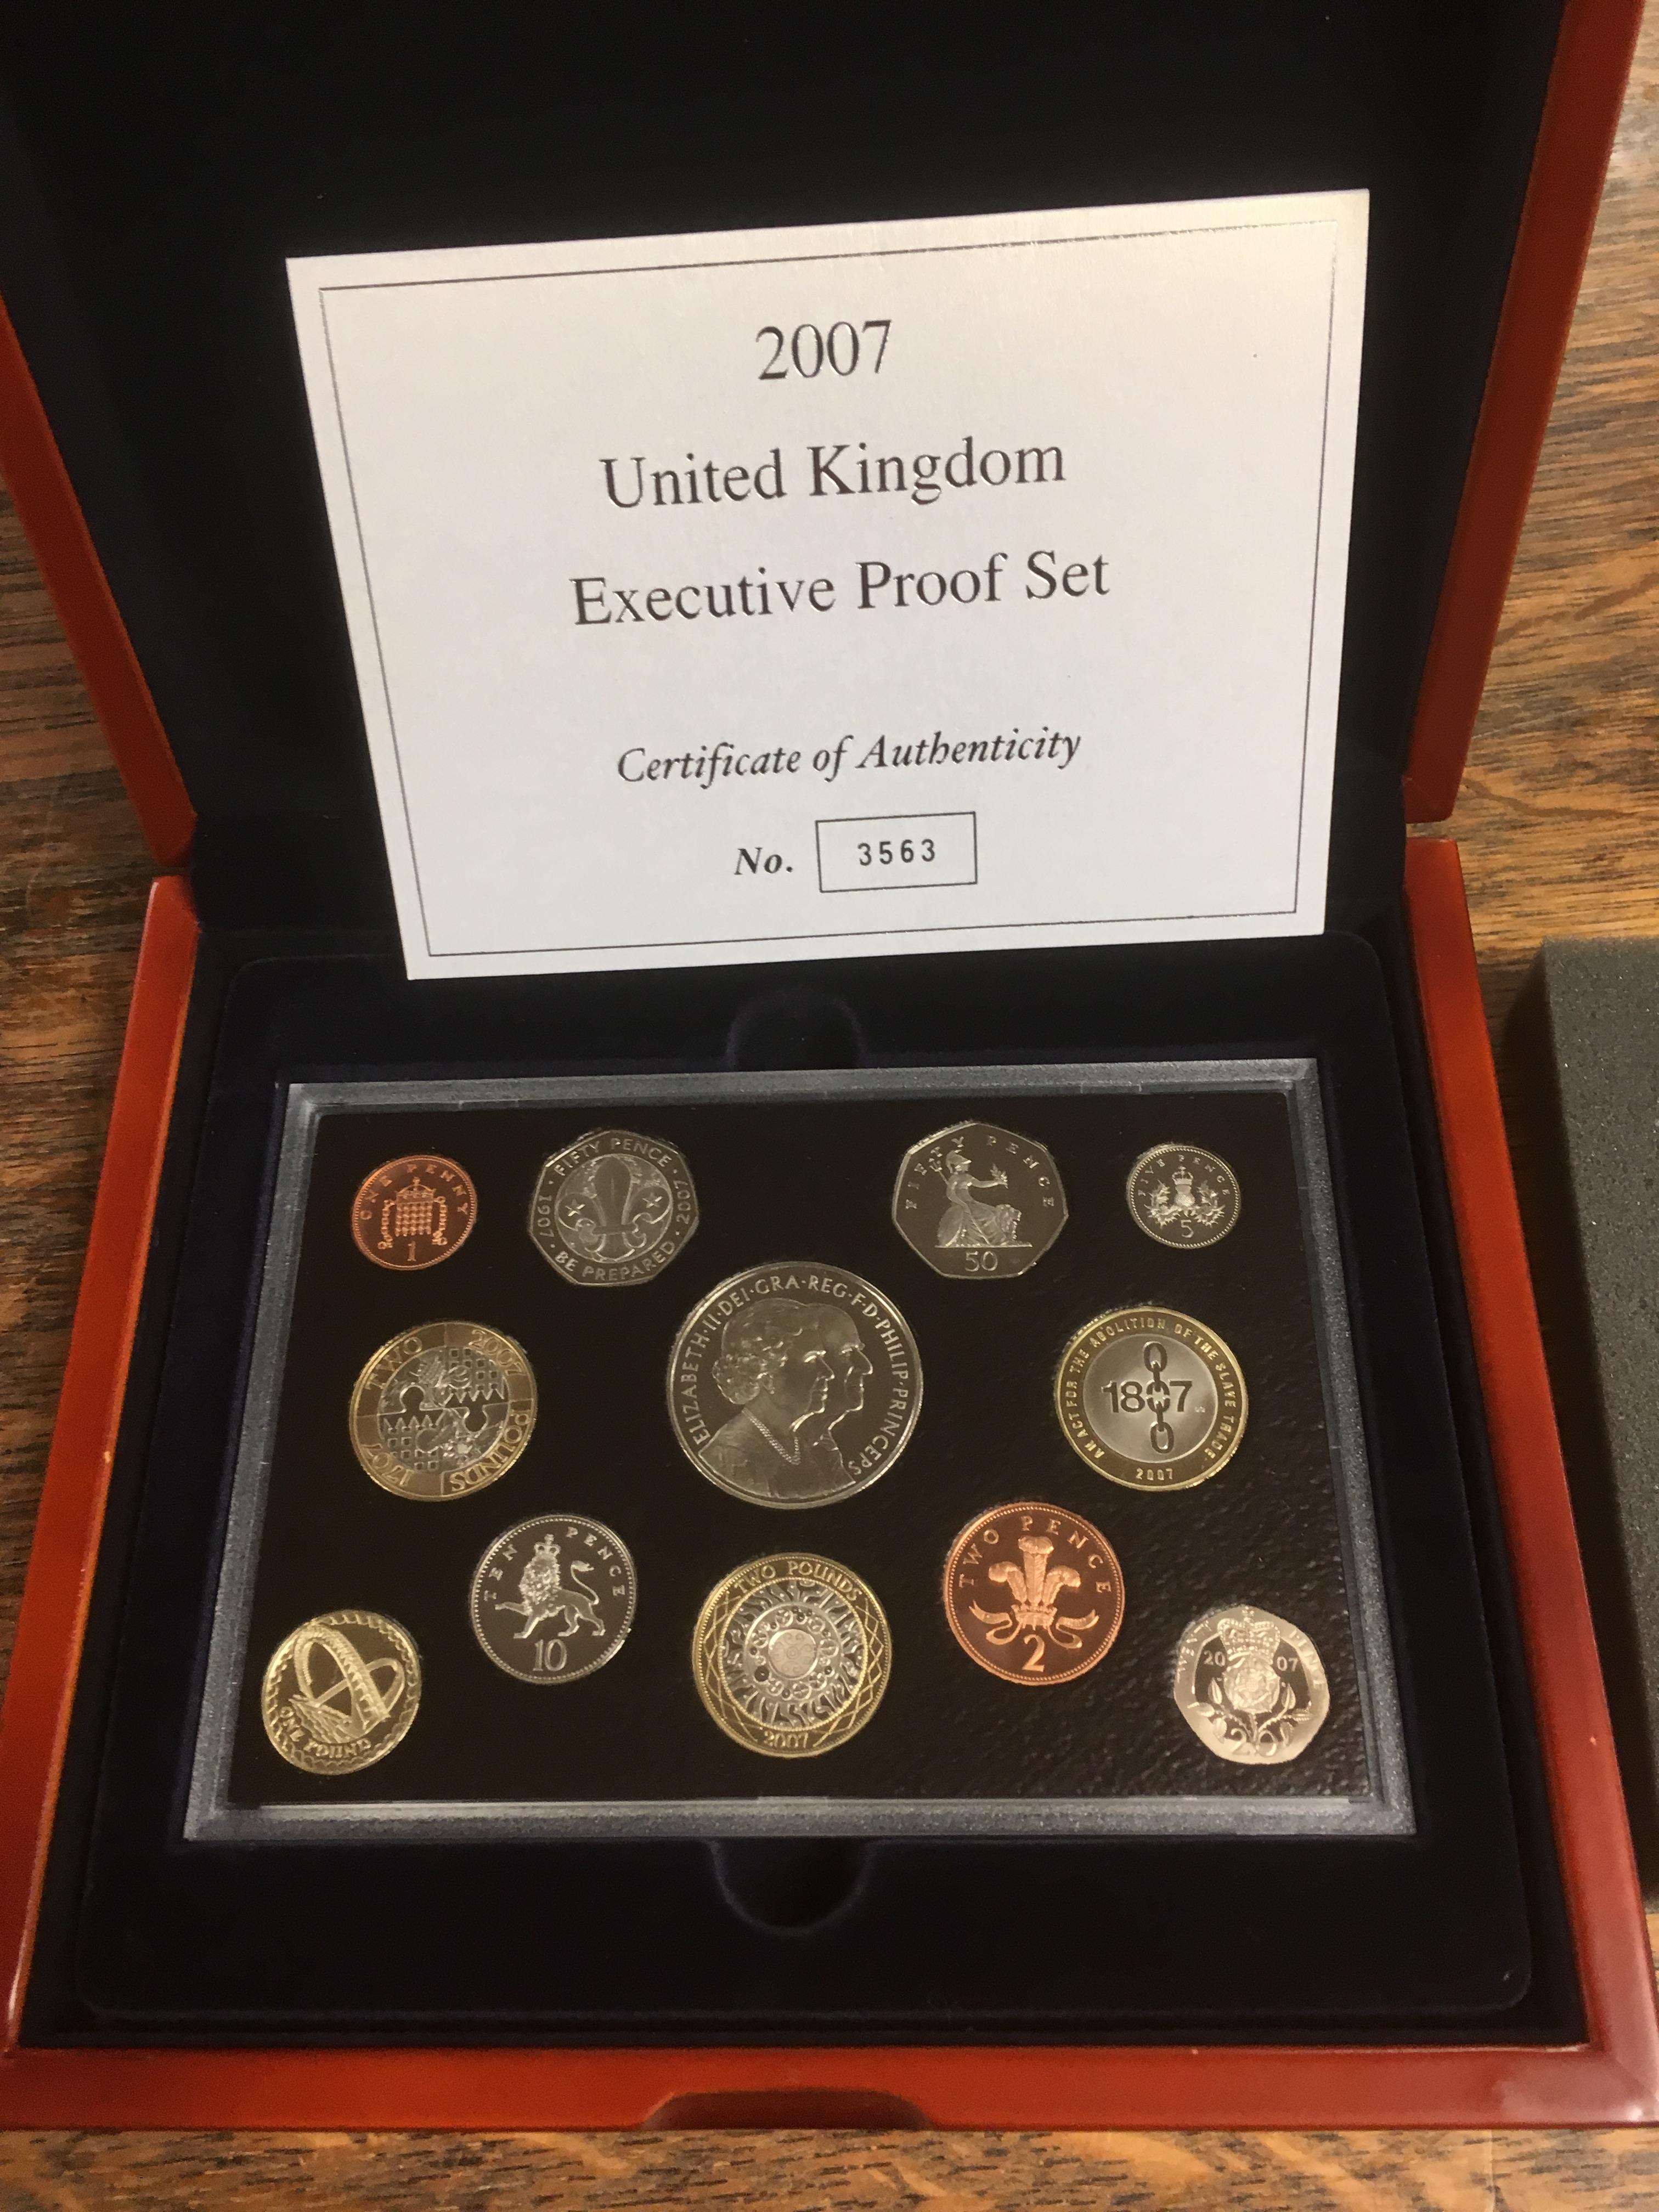 GB 2007 EXECUTIVE PROOF COIN SET IN BOX WITH CERTIFICATE - Image 3 of 6